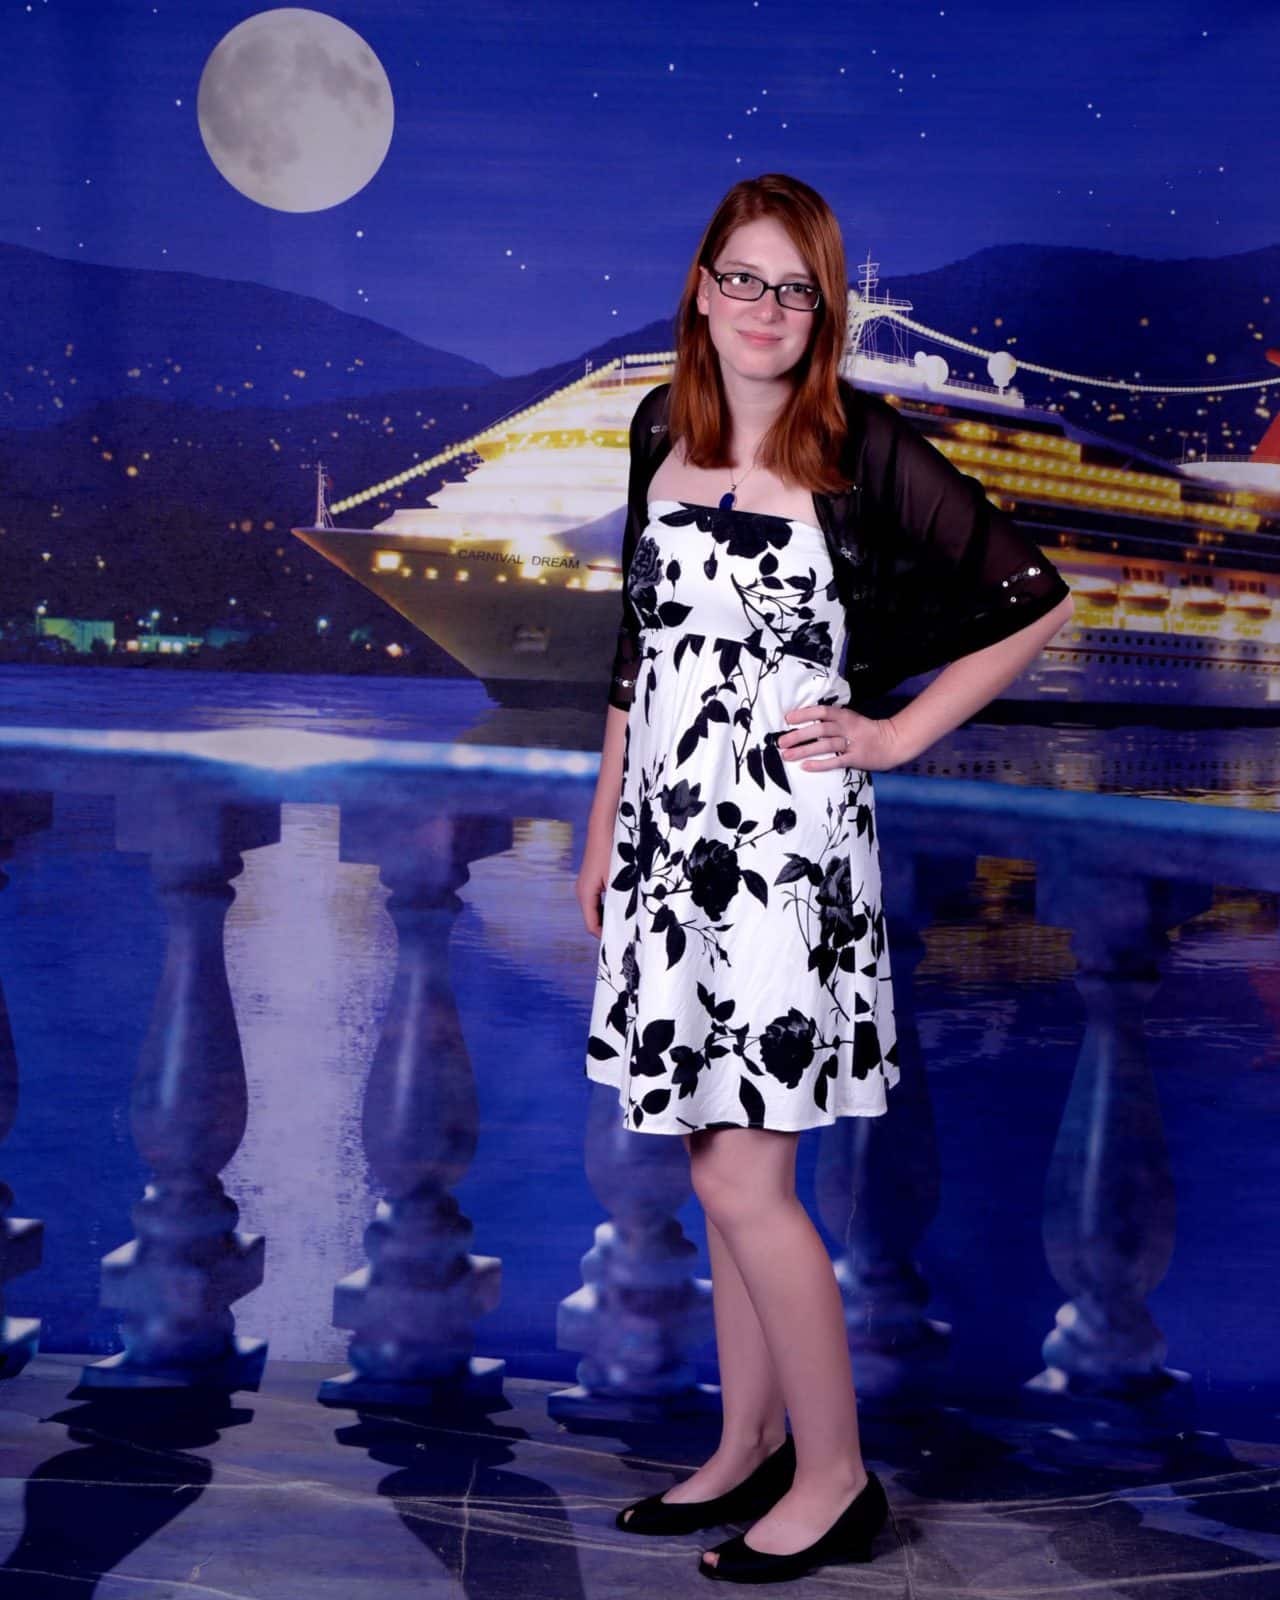 Young woman poses in front of back drop on elegant night on a Carnival Dream Cruise